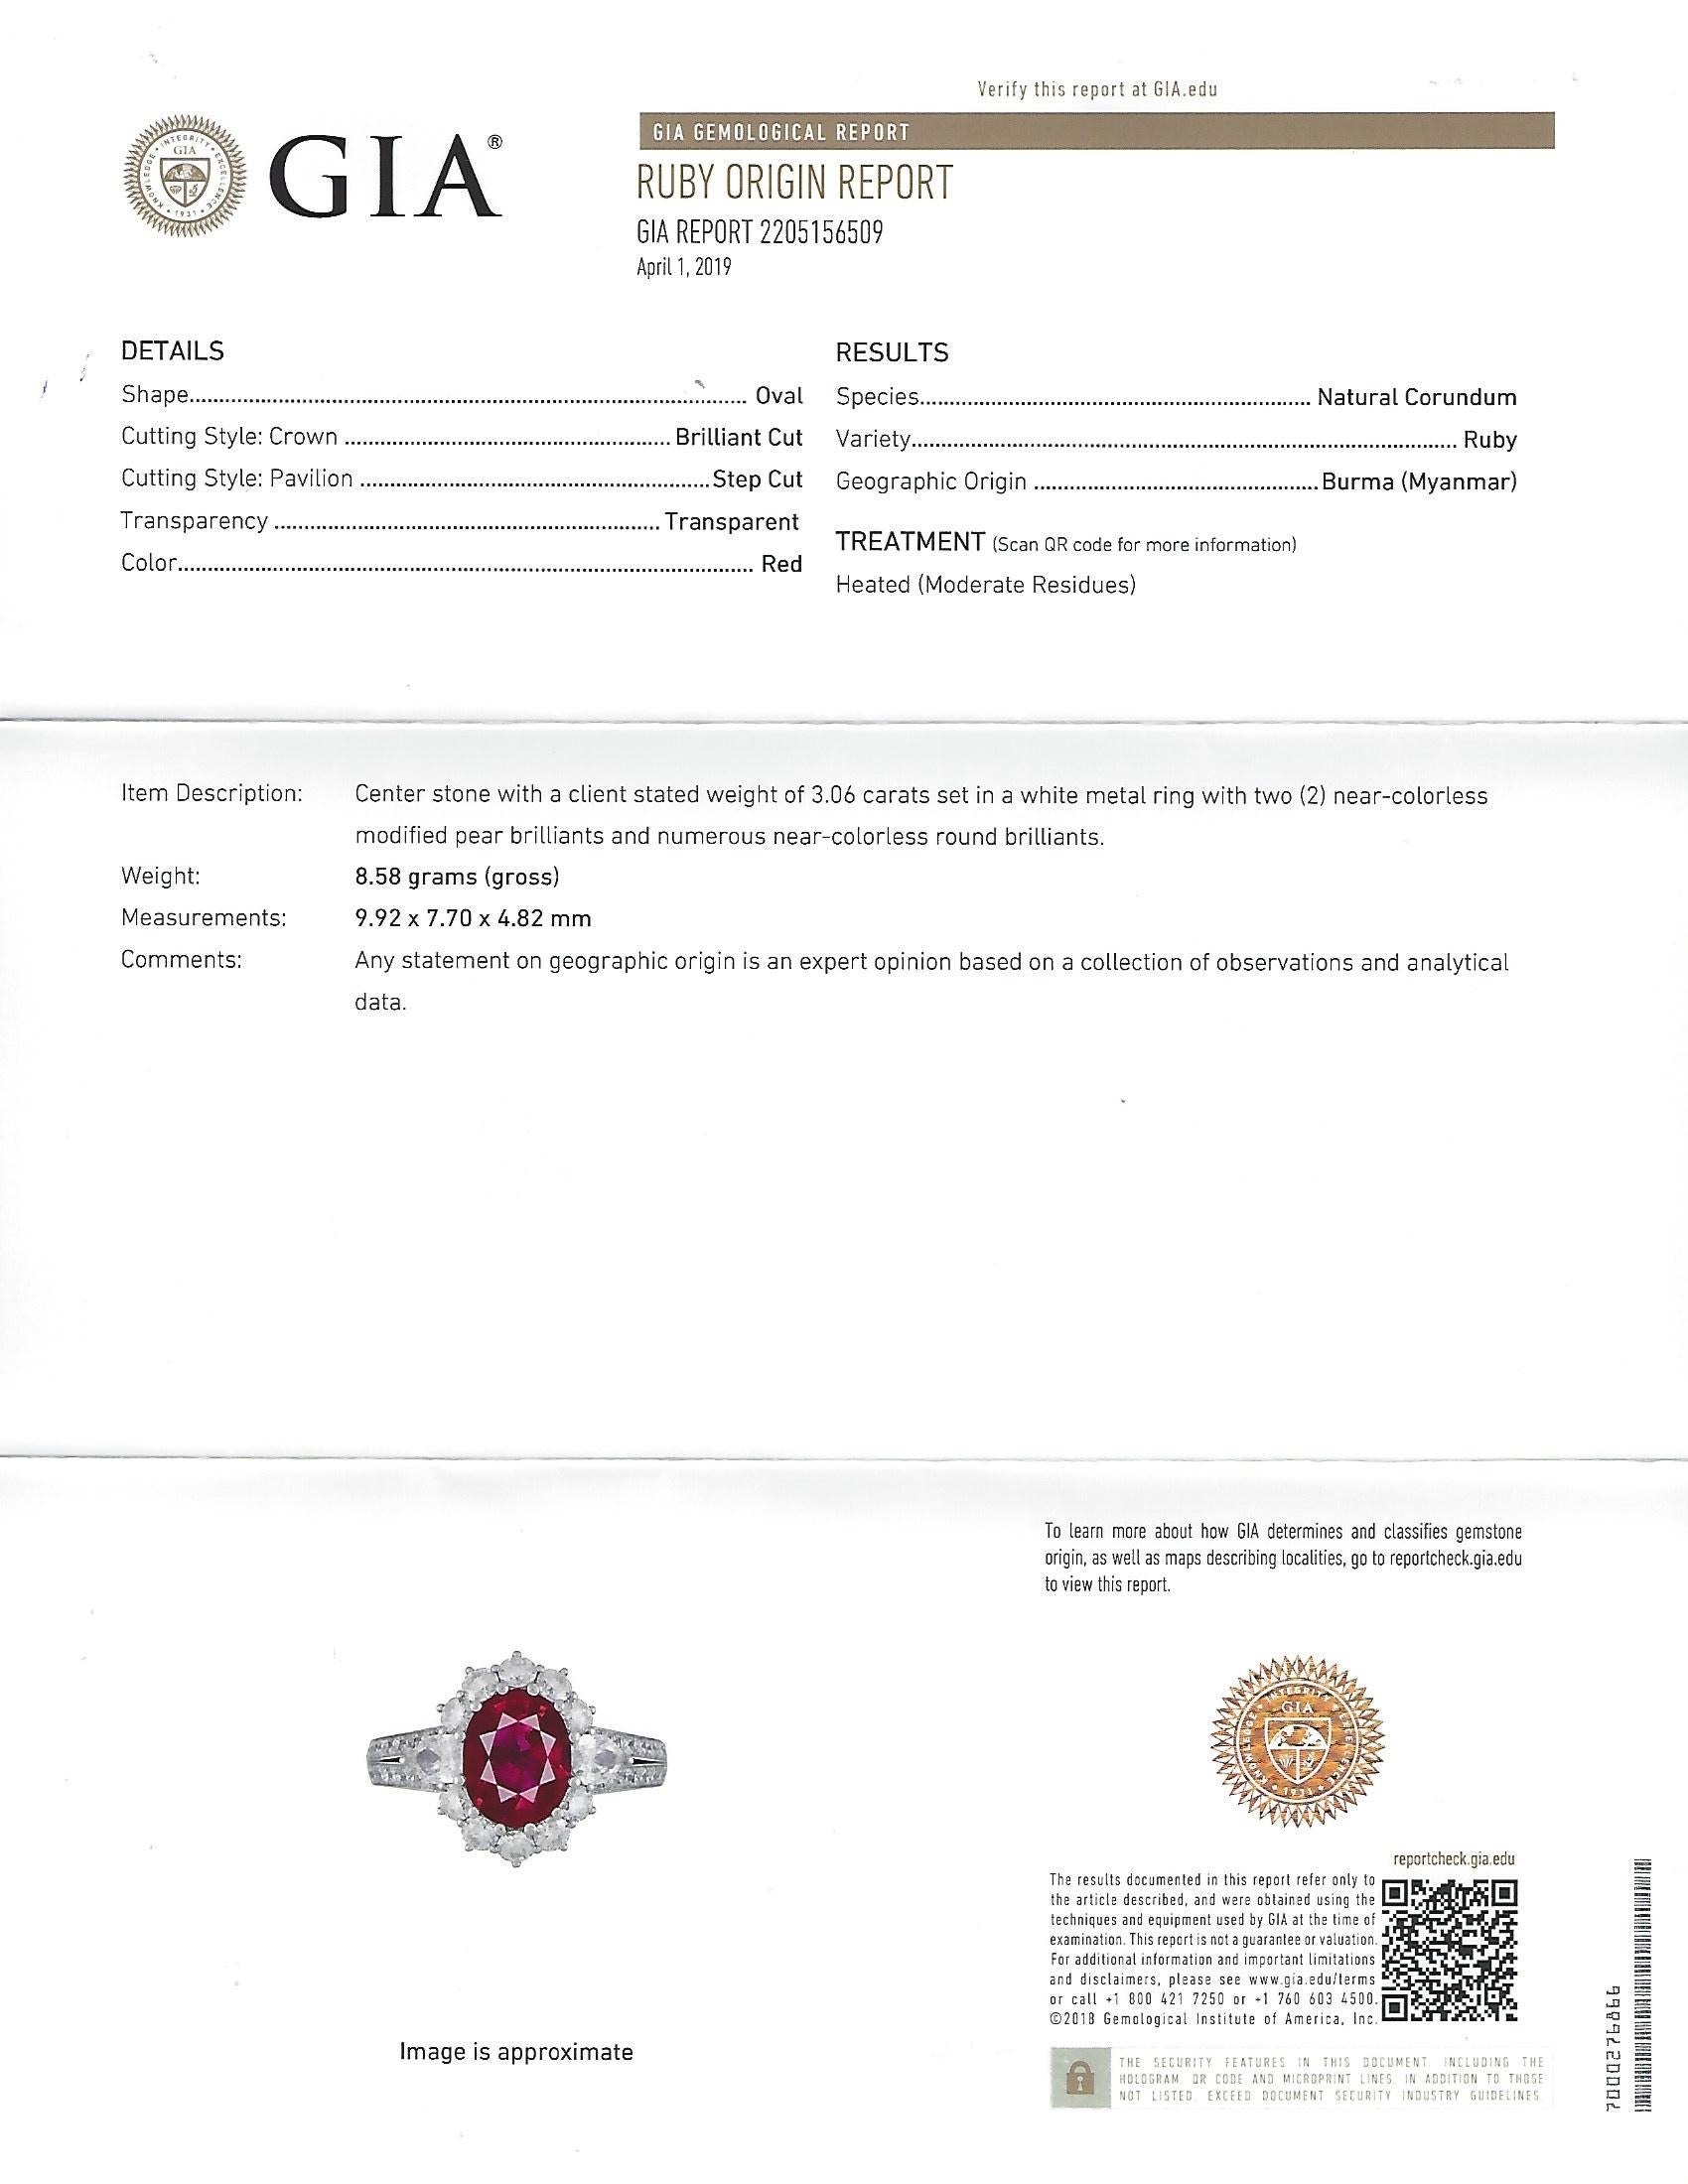 Gorgeous GIA 3.06 Carat Burma Ruby and Diamond Ring For Sale 1